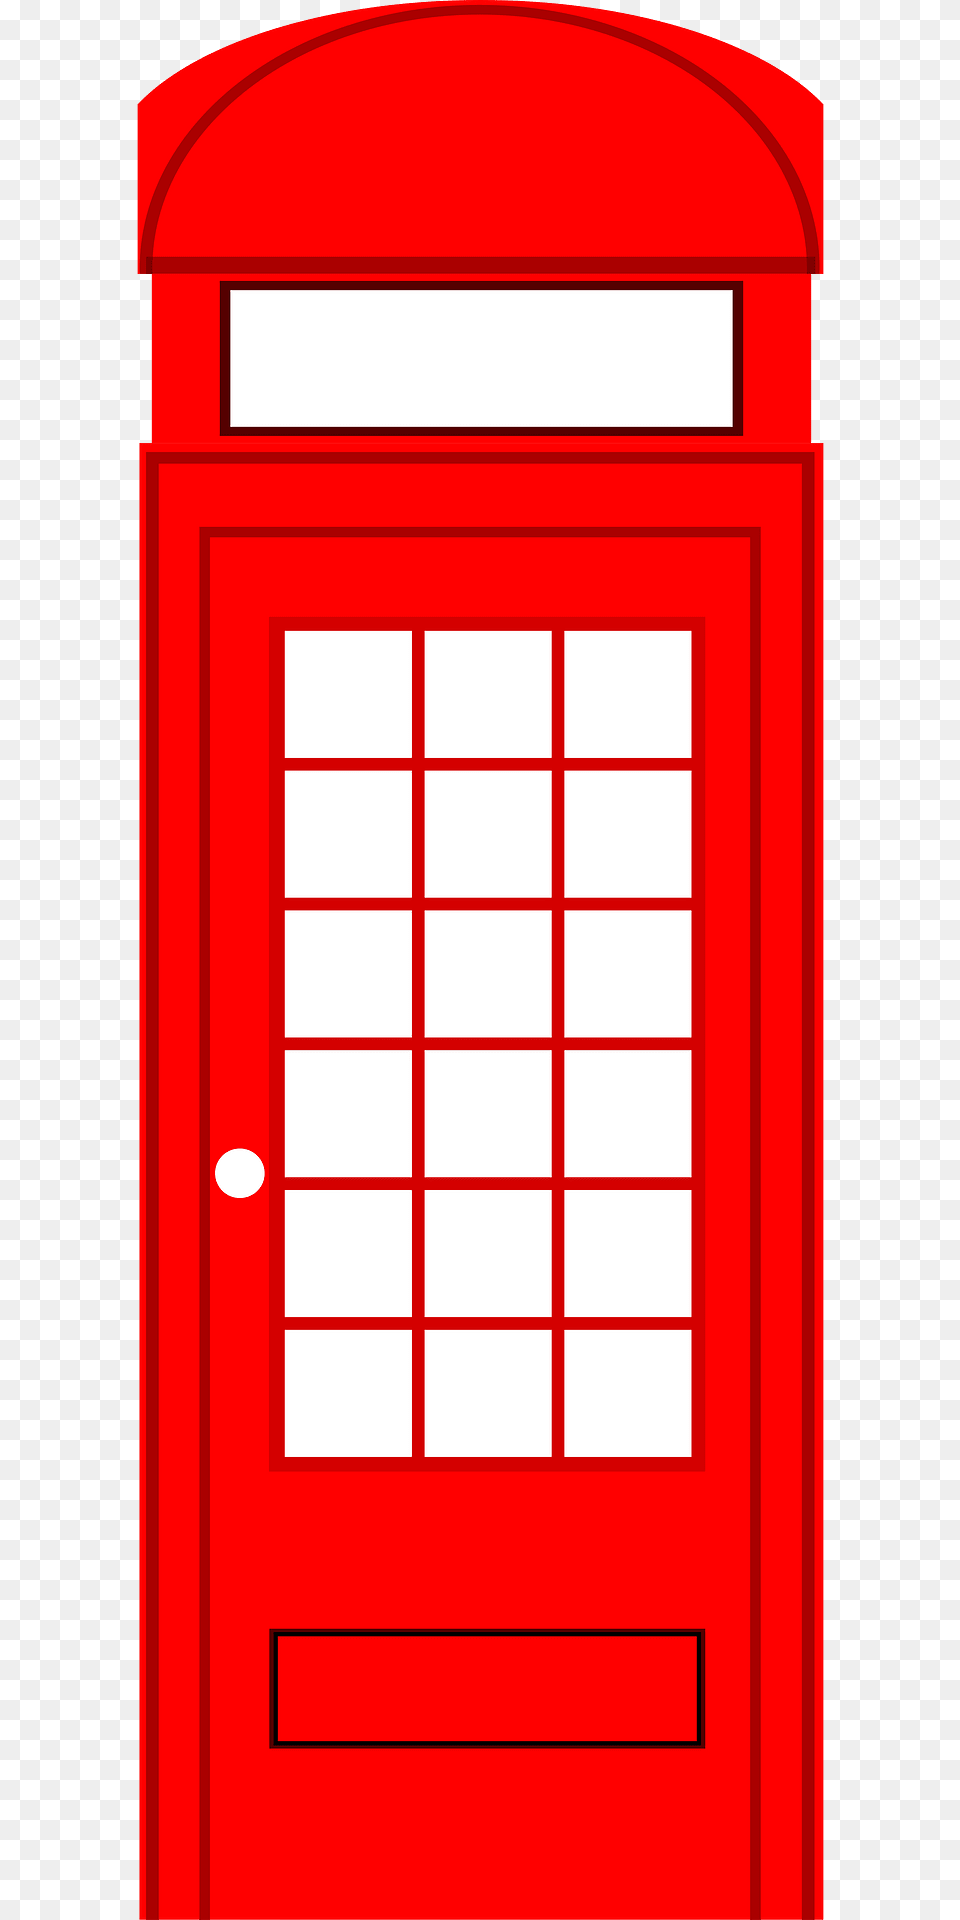 Phone Booth Clipart Free Png